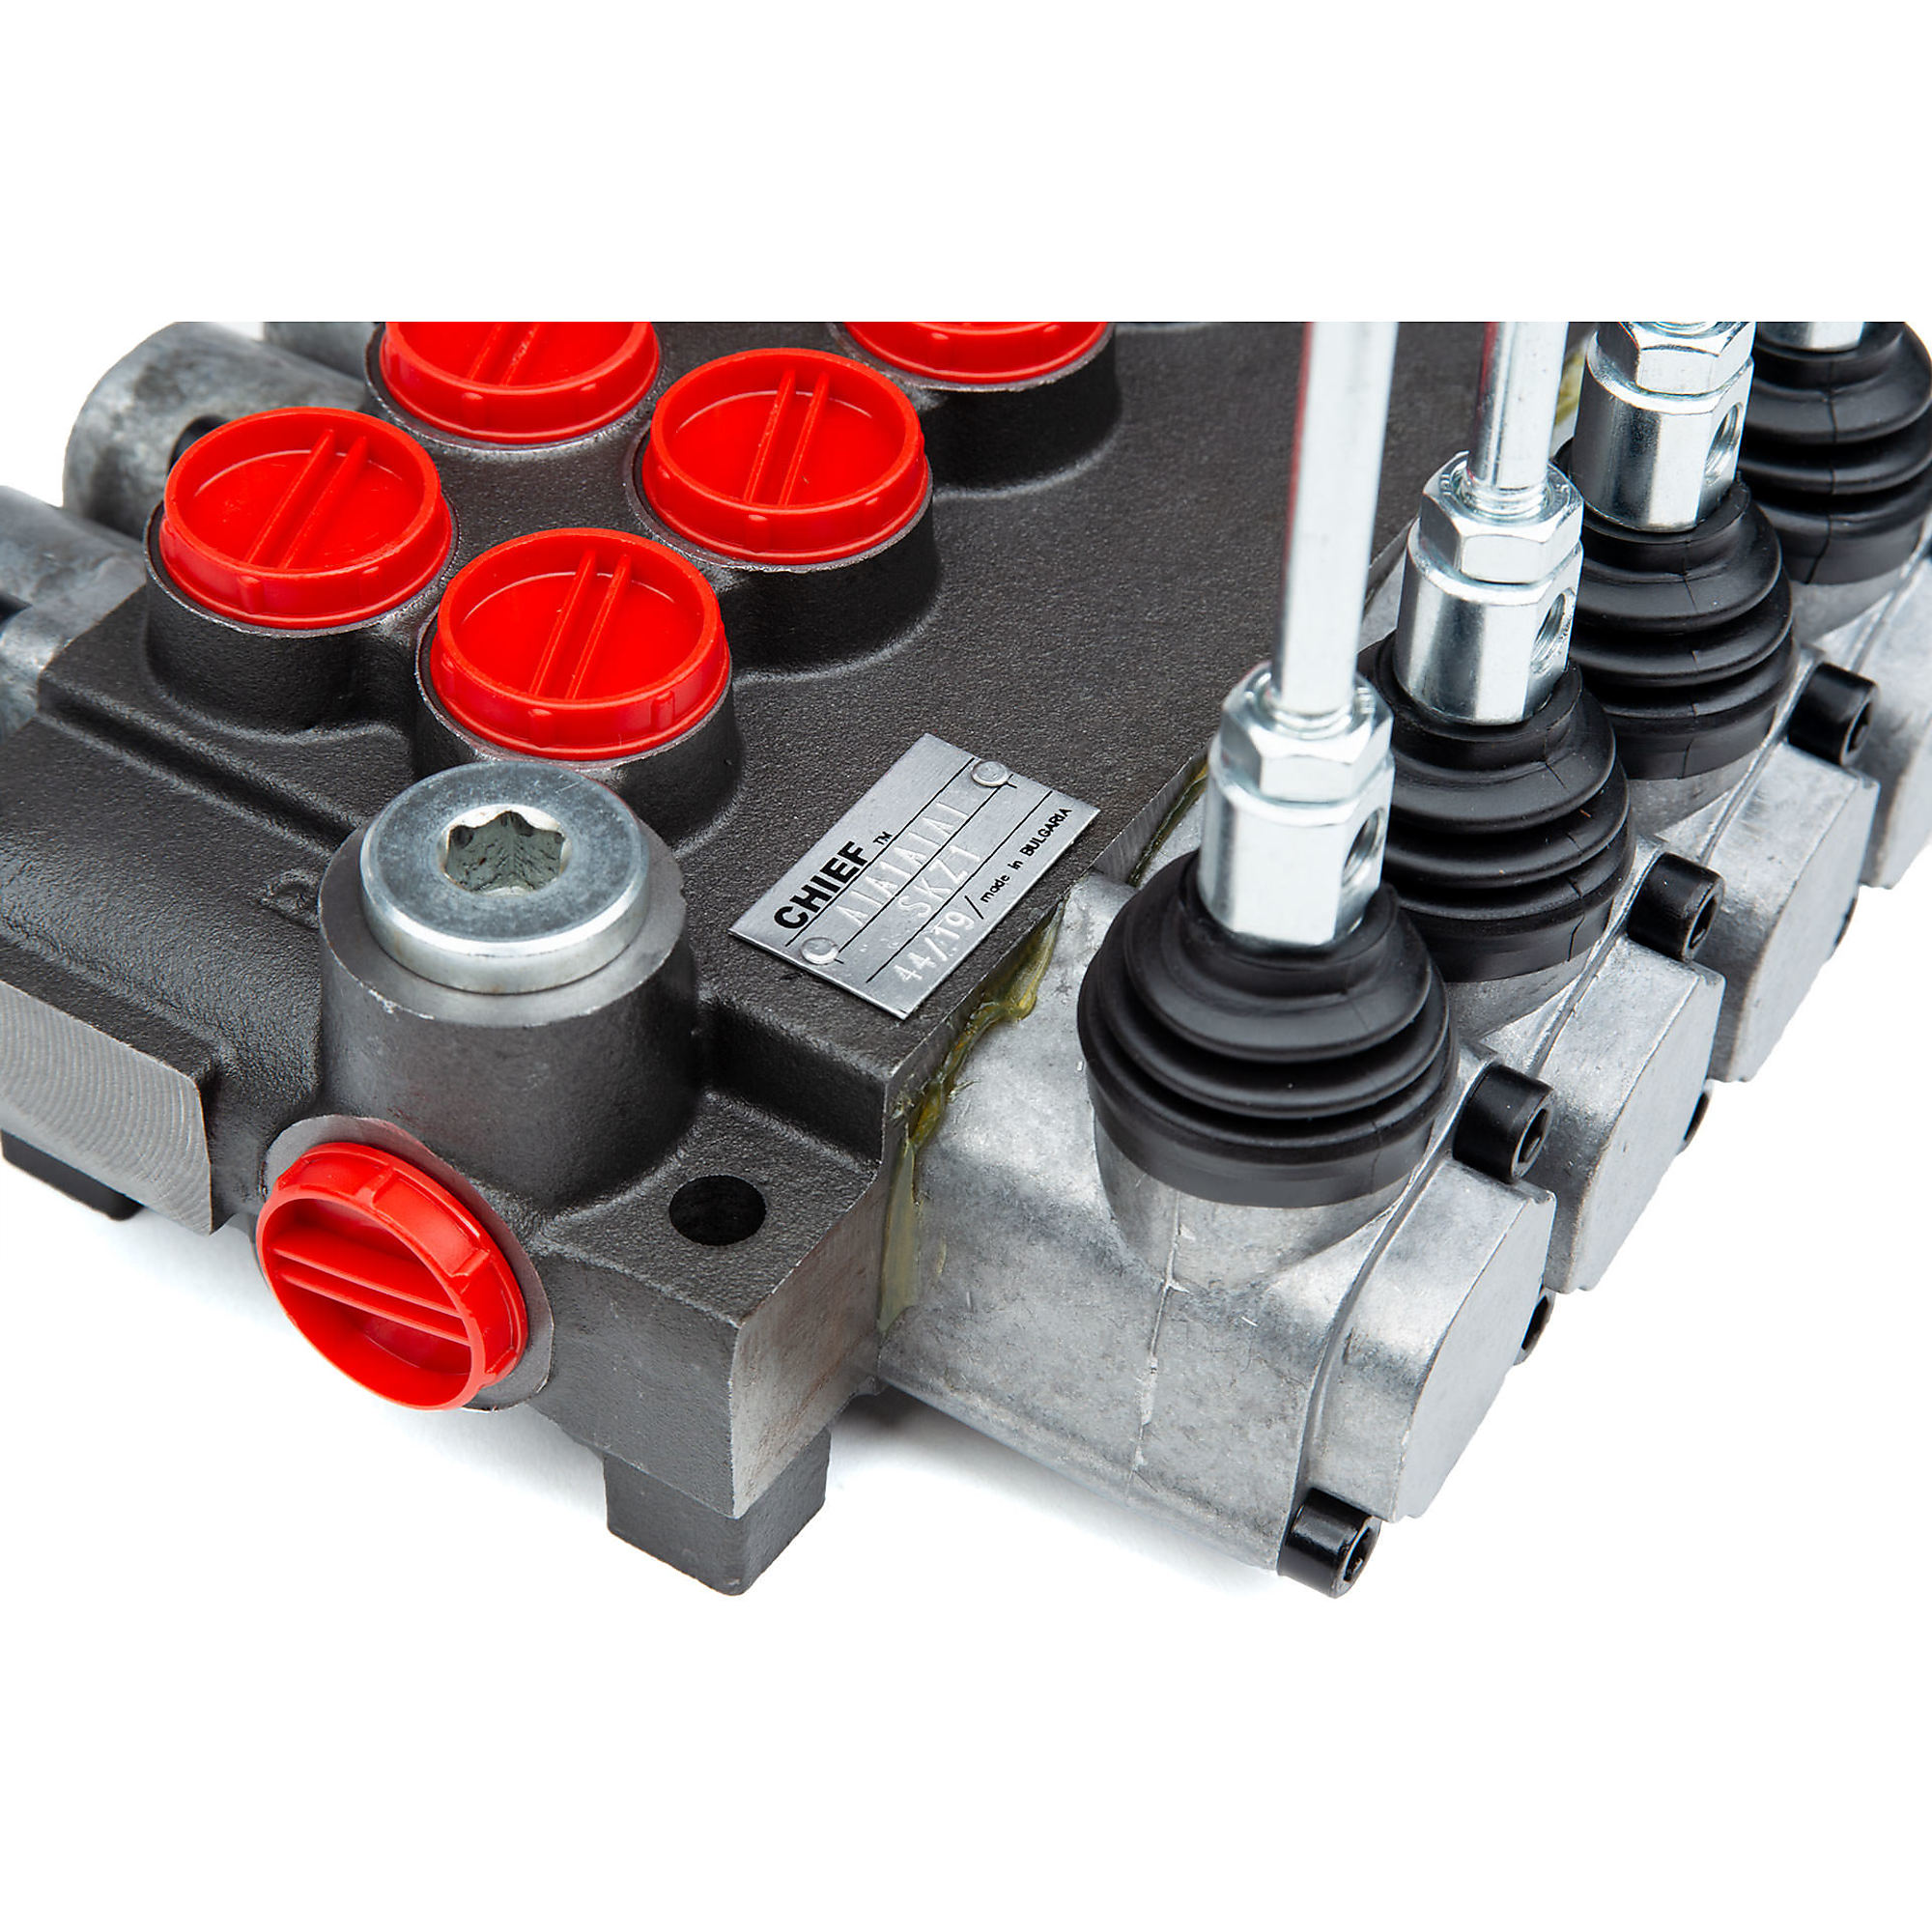 Chief, Hydraulic Directional Valve, GPM 10, Working Port #8 SAE in, Max. PSI  3625, Model# 220909 Northern Tool